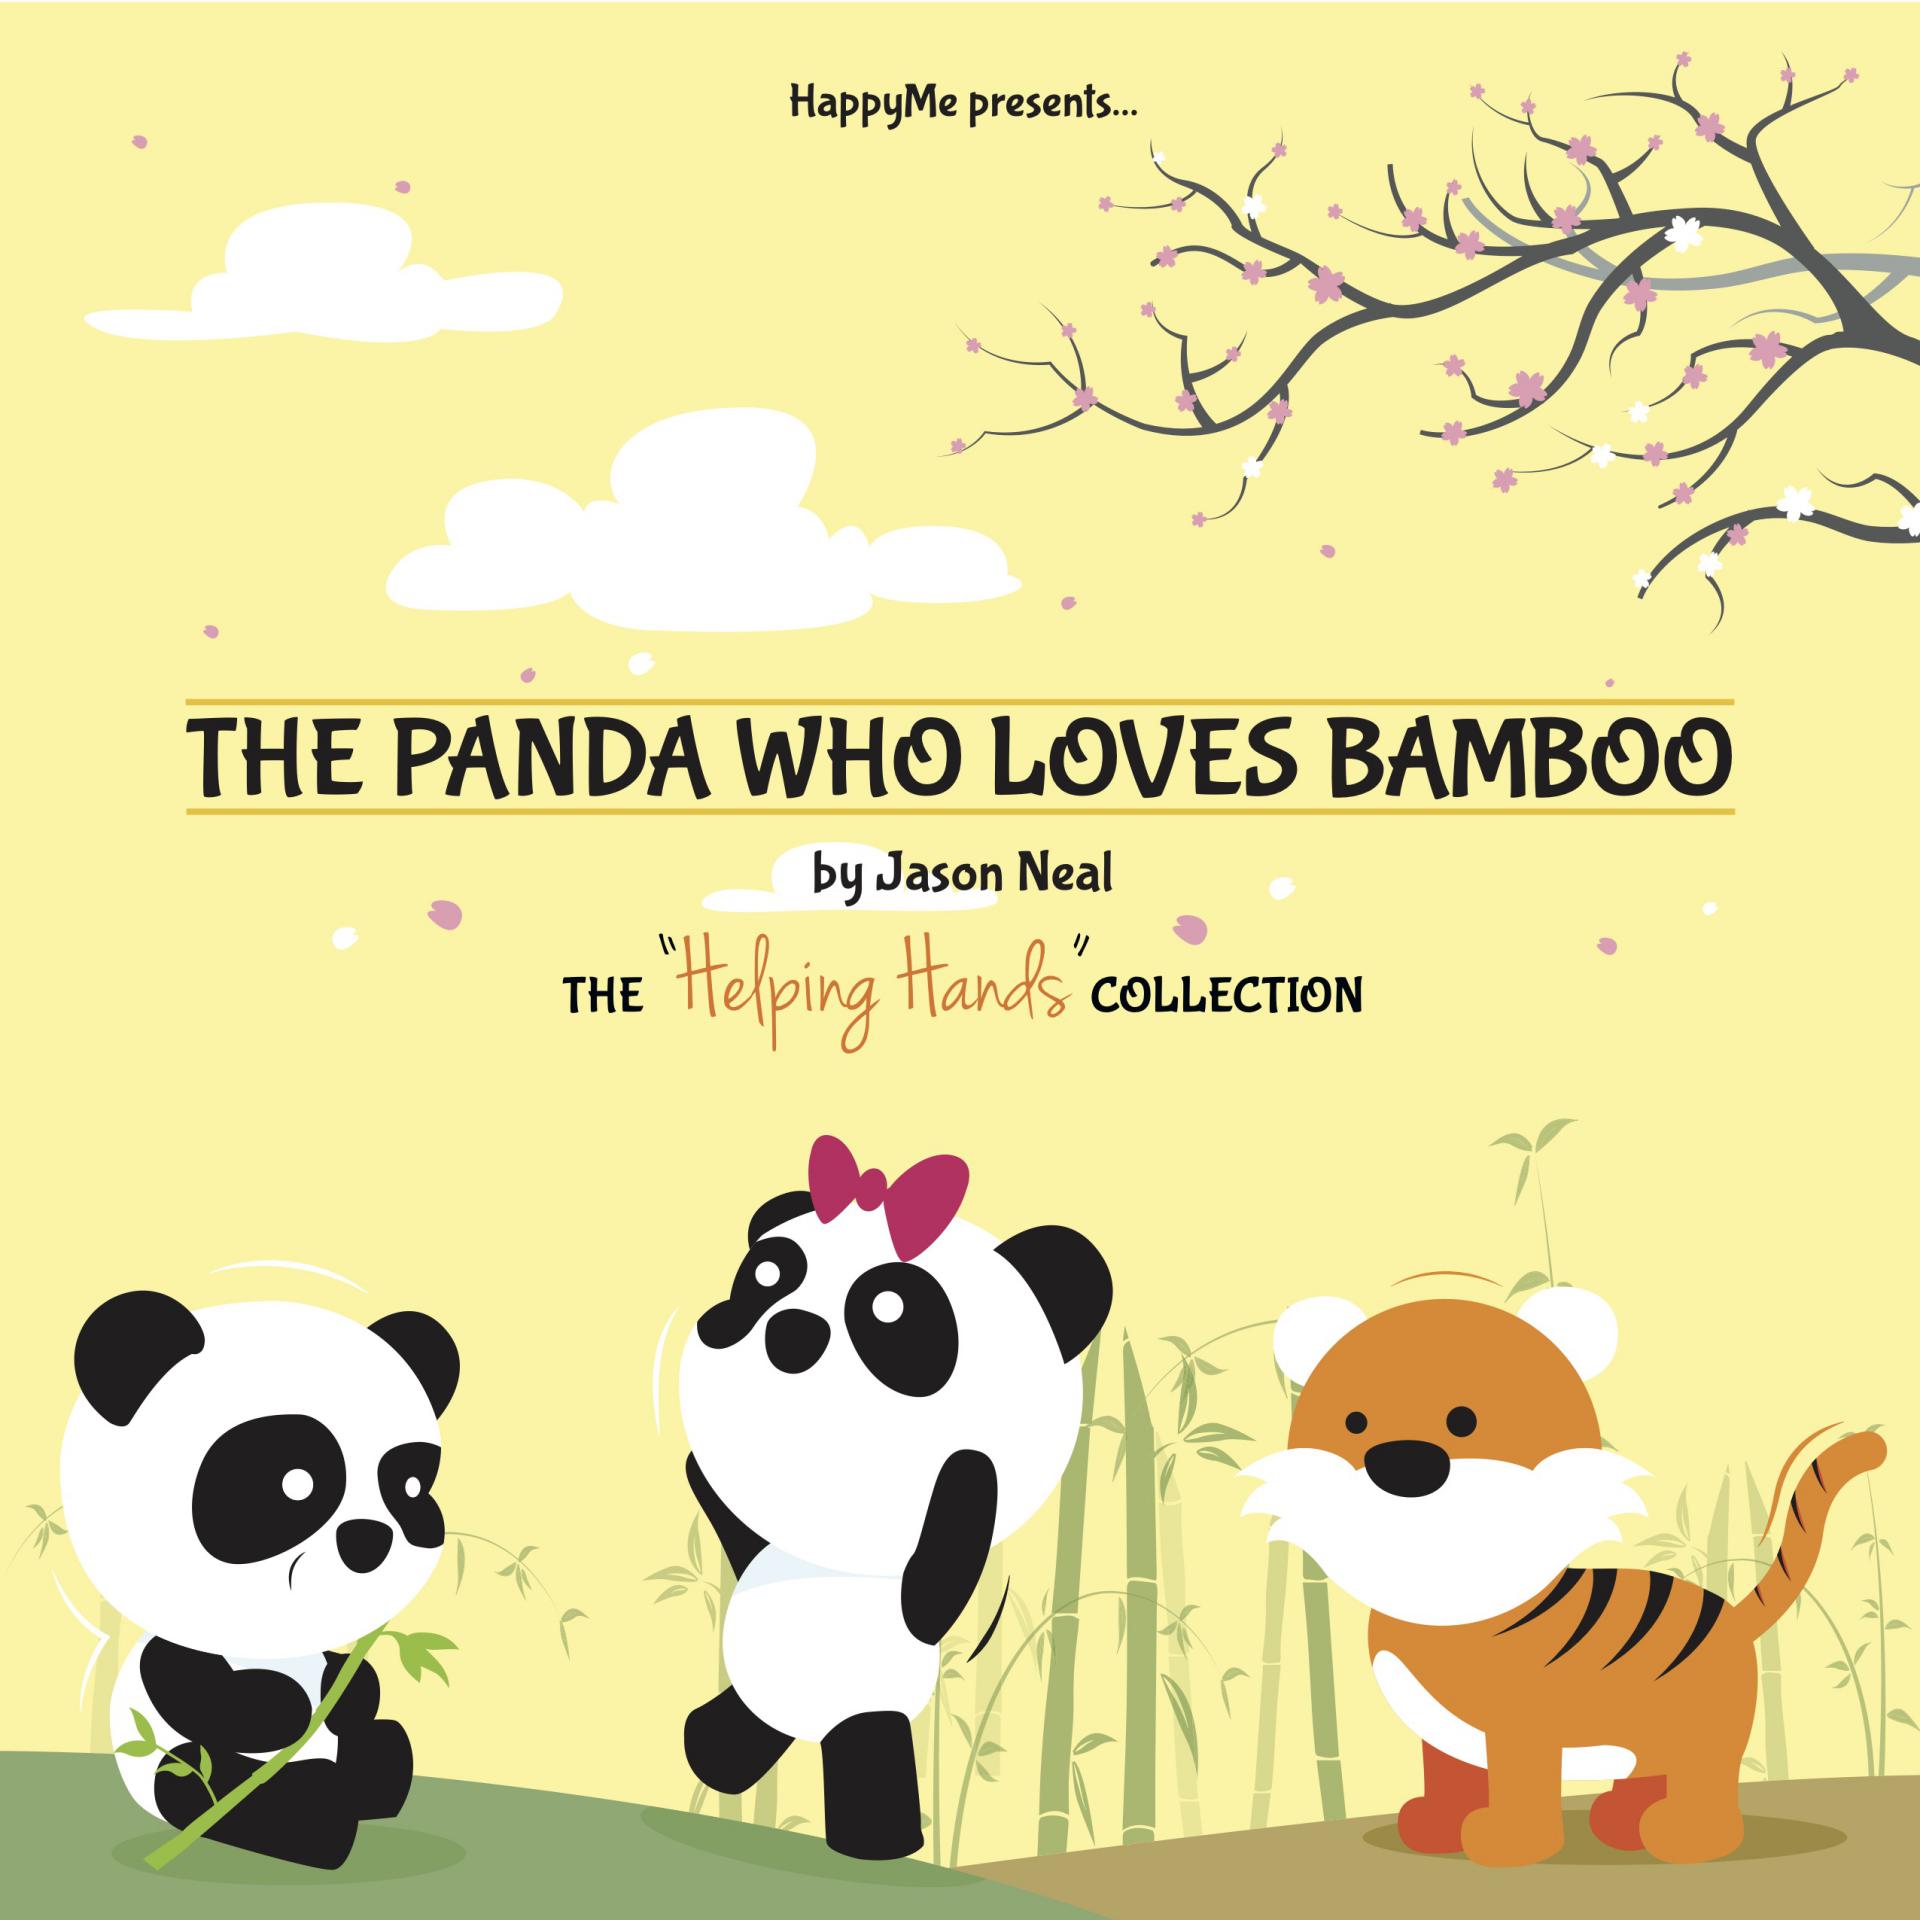 FREE: The Panda Who Loves Bamboo by Jason Kyle Neal